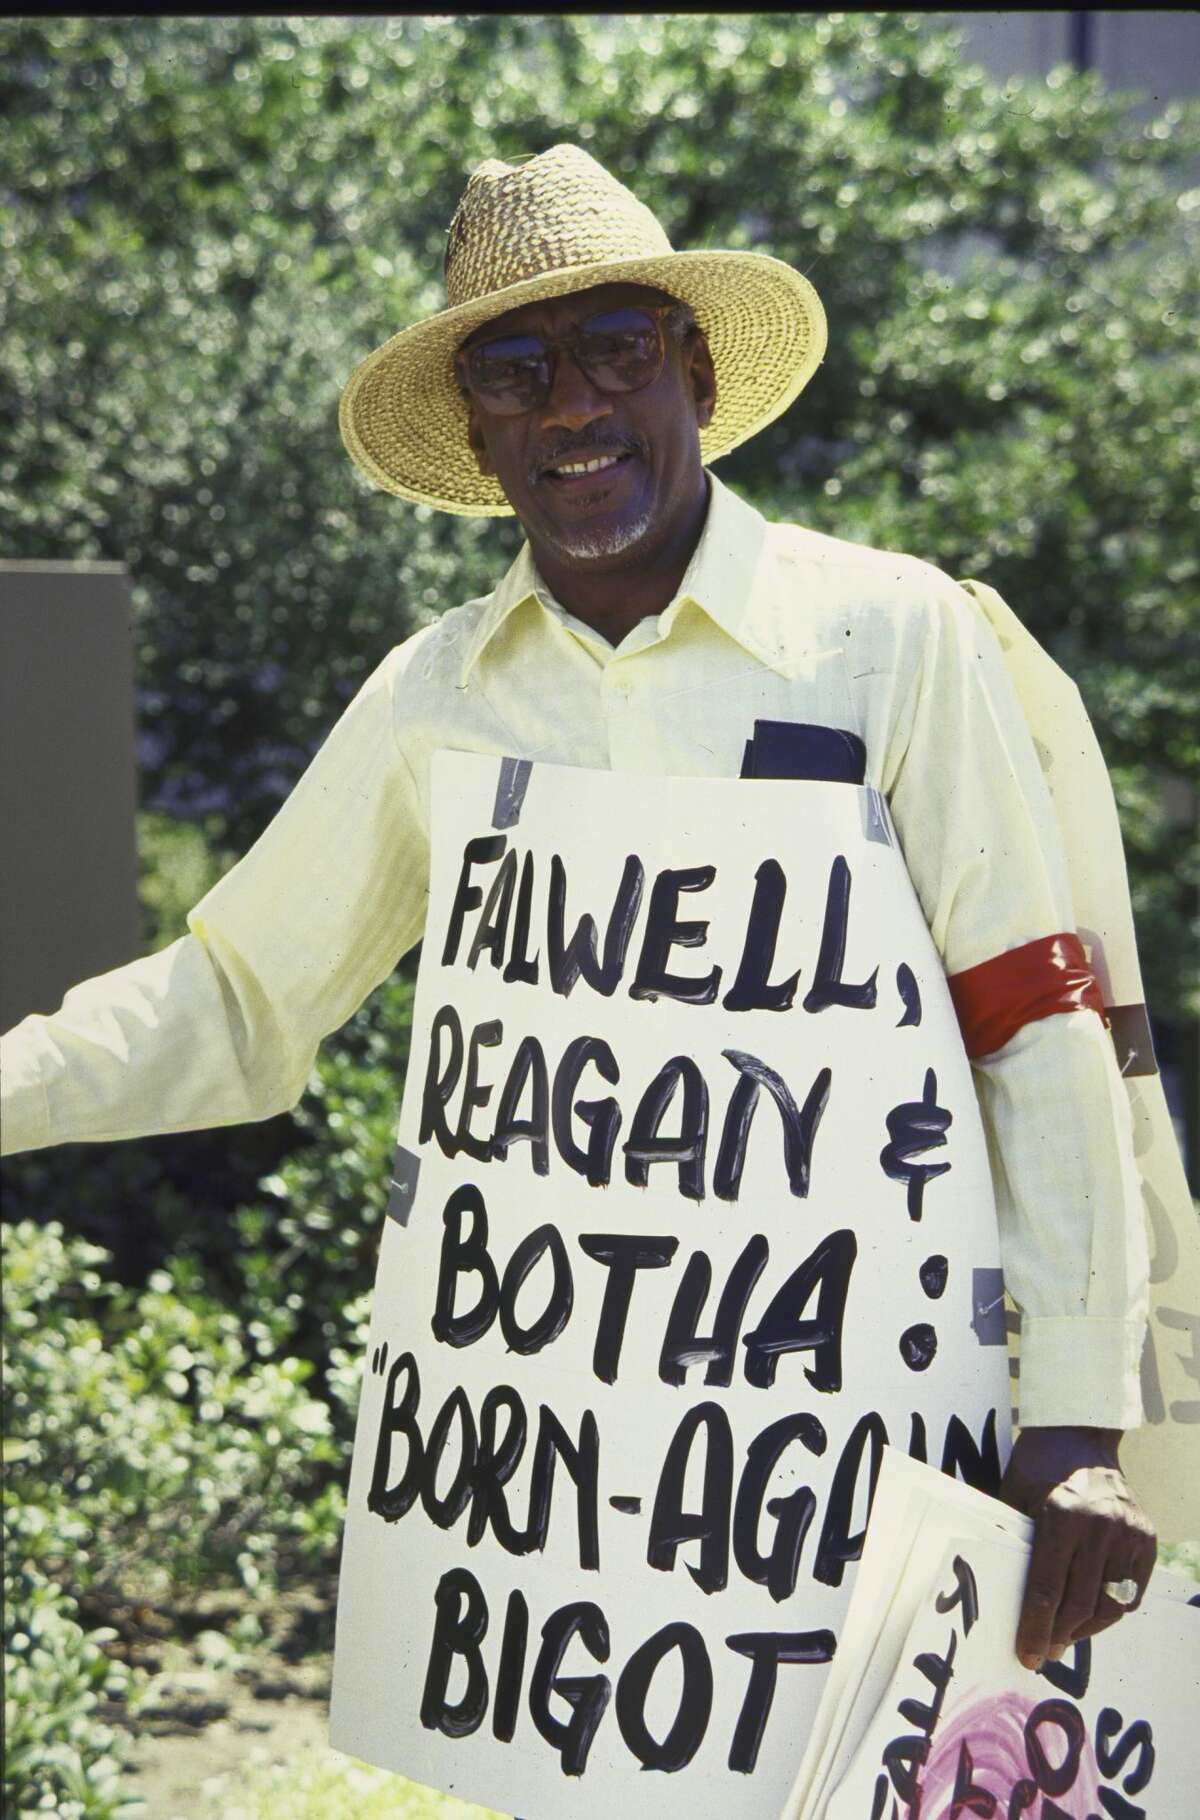 Counter-protestor wearing sign against apartheid, criticizing US Pres. Ronald W. Reagan regarding his South African policy of constructive engagement, along with the names of Moral Majority Leader Rev. Jerry Falwell and So. African Pres. Pieter Willem Botha, calling them Born Again Bigots during Falwell's anti-pornography demonstration.